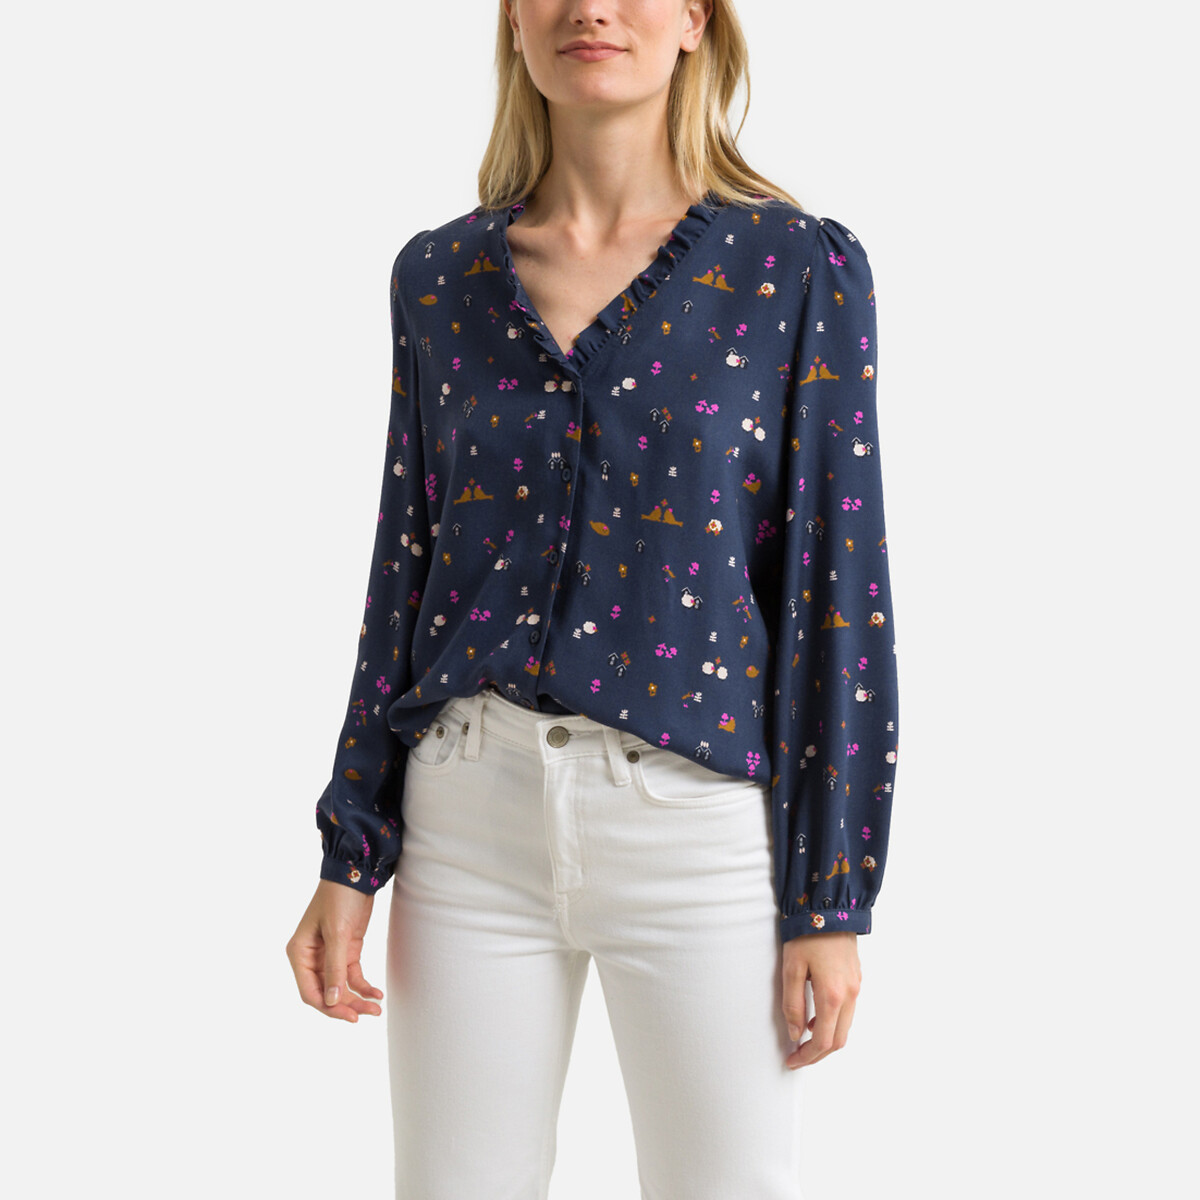 Toumi Floral Print Blouse with Ruffled V-Neck and Long Sleeves